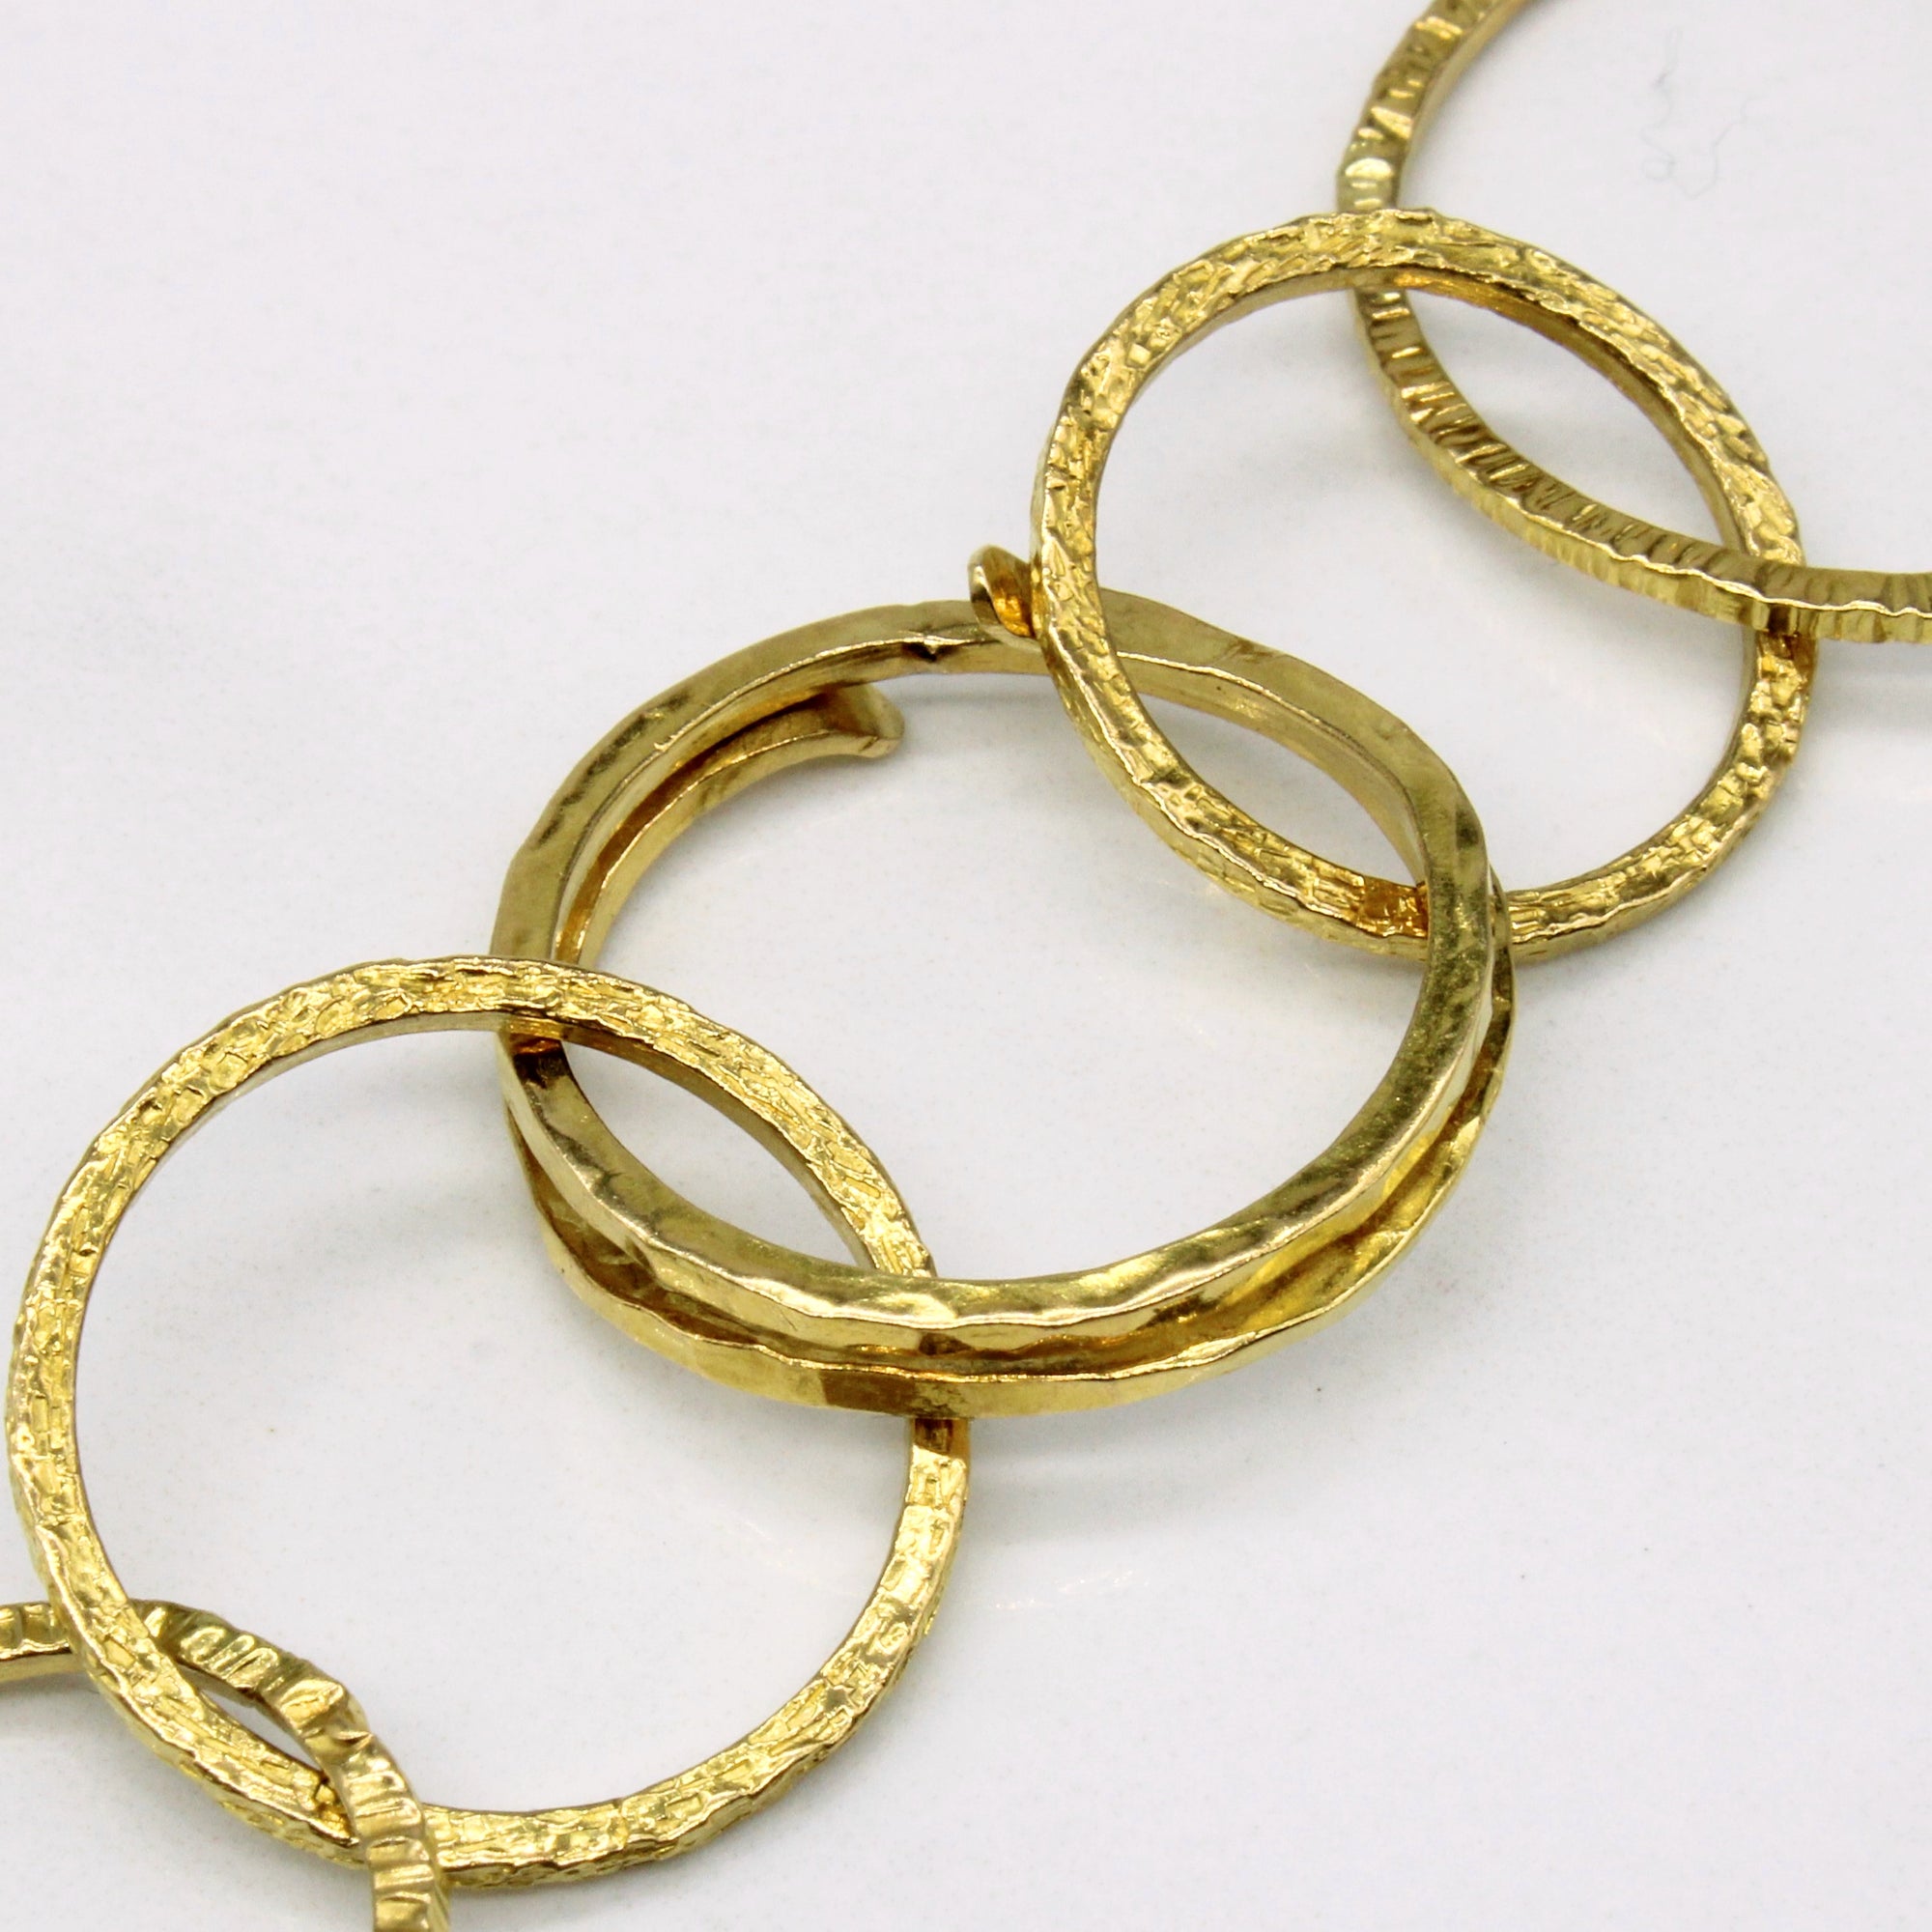 18k Yellow Gold Circle Link Necklace | 30